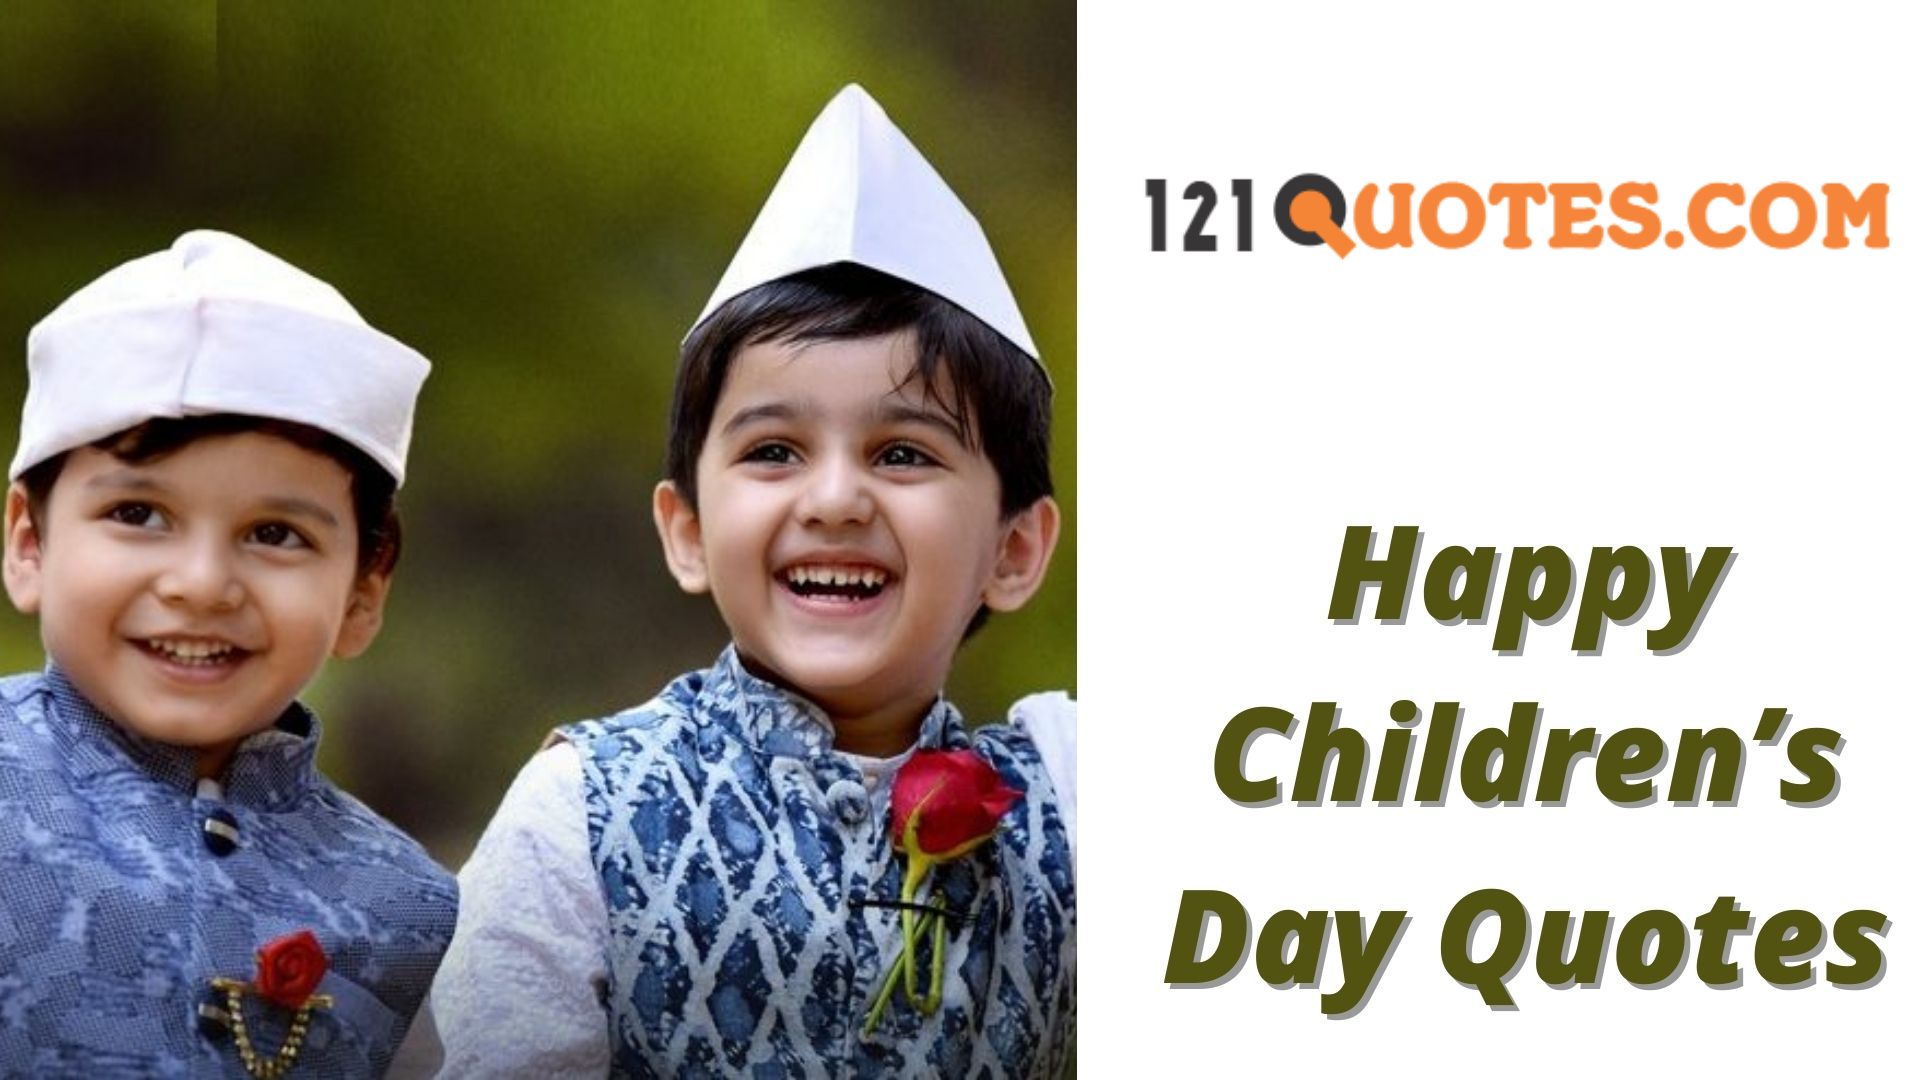 Happy Children's Day Quotes, Wishes, Messages, Wallpapers, Status